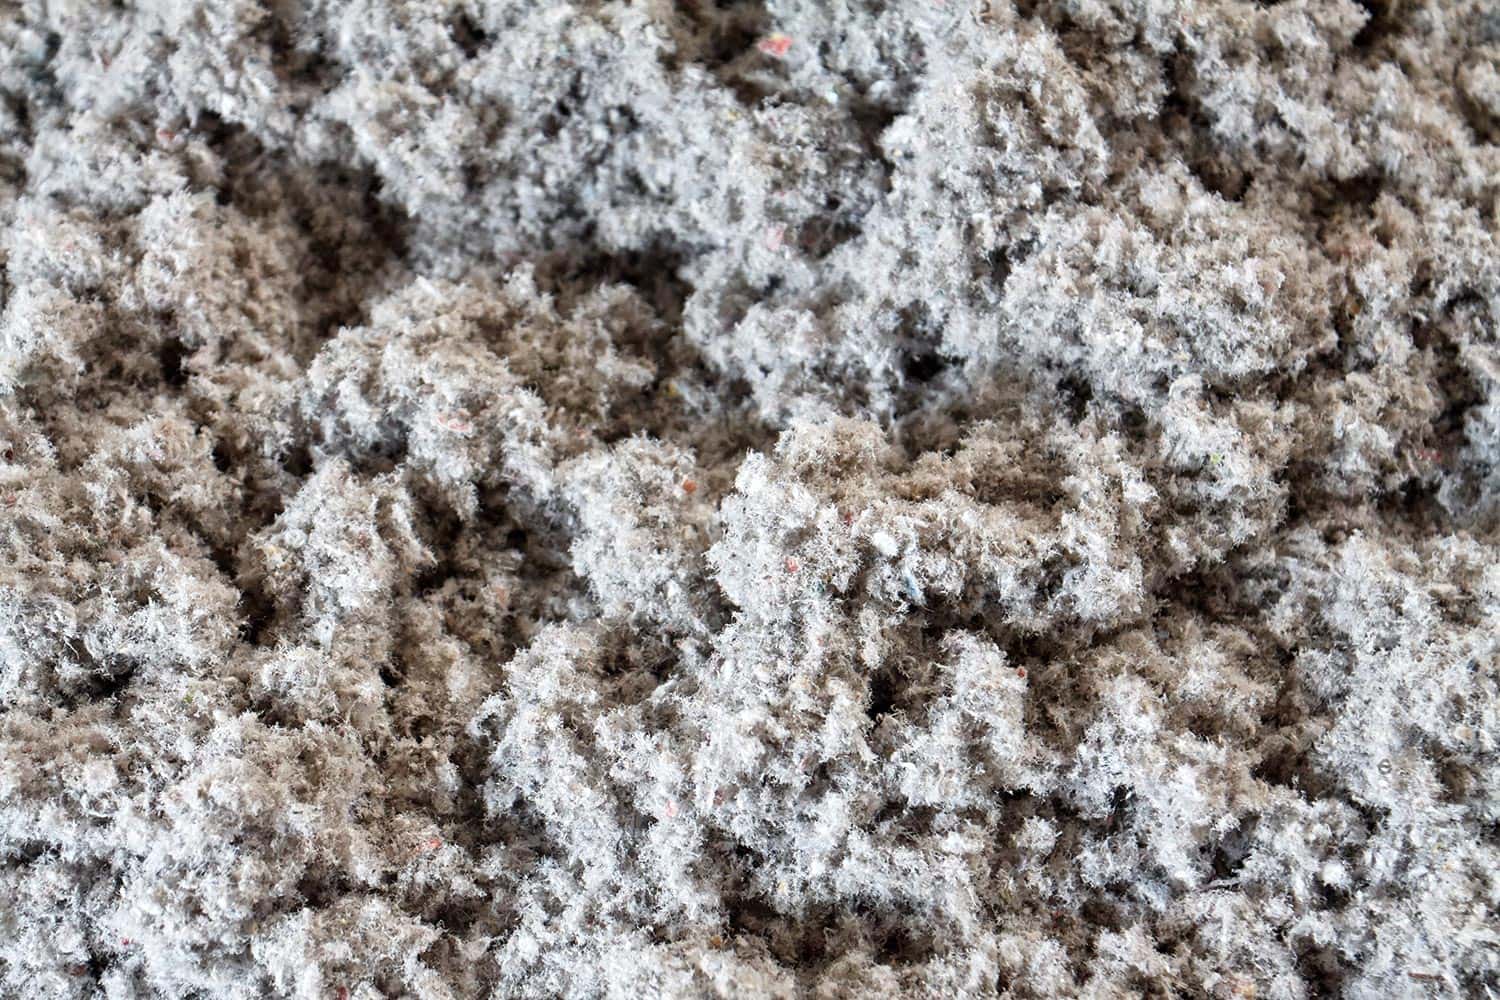 Eco-friendly cellulose insulation made from recycled paper